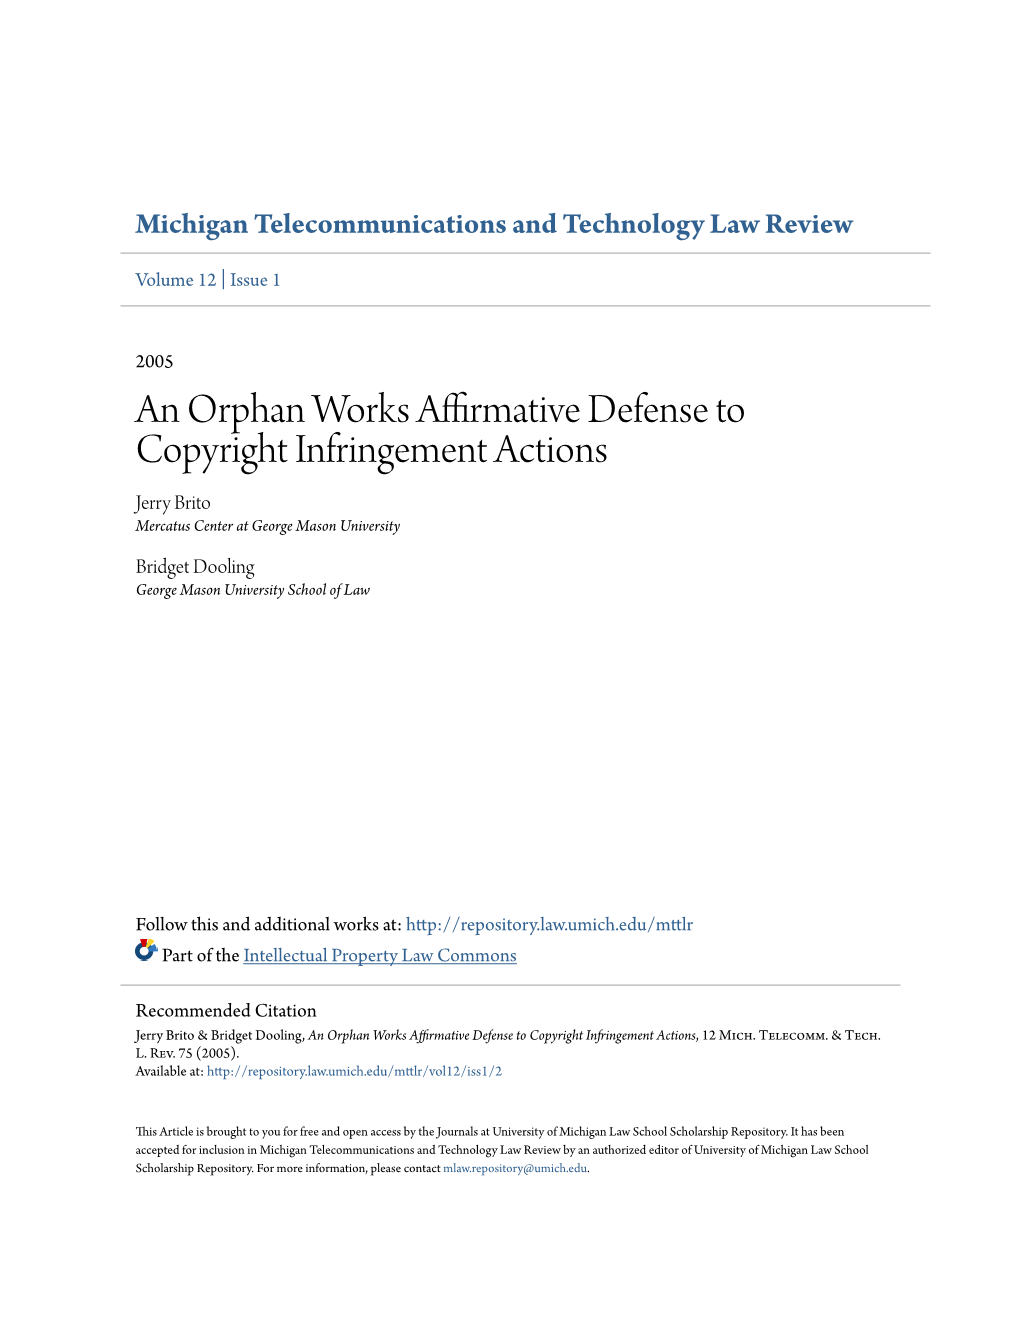 An Orphan Works Affirmative Defense to Copyright Infringement Actions Jerry Brito Mercatus Center at George Mason University